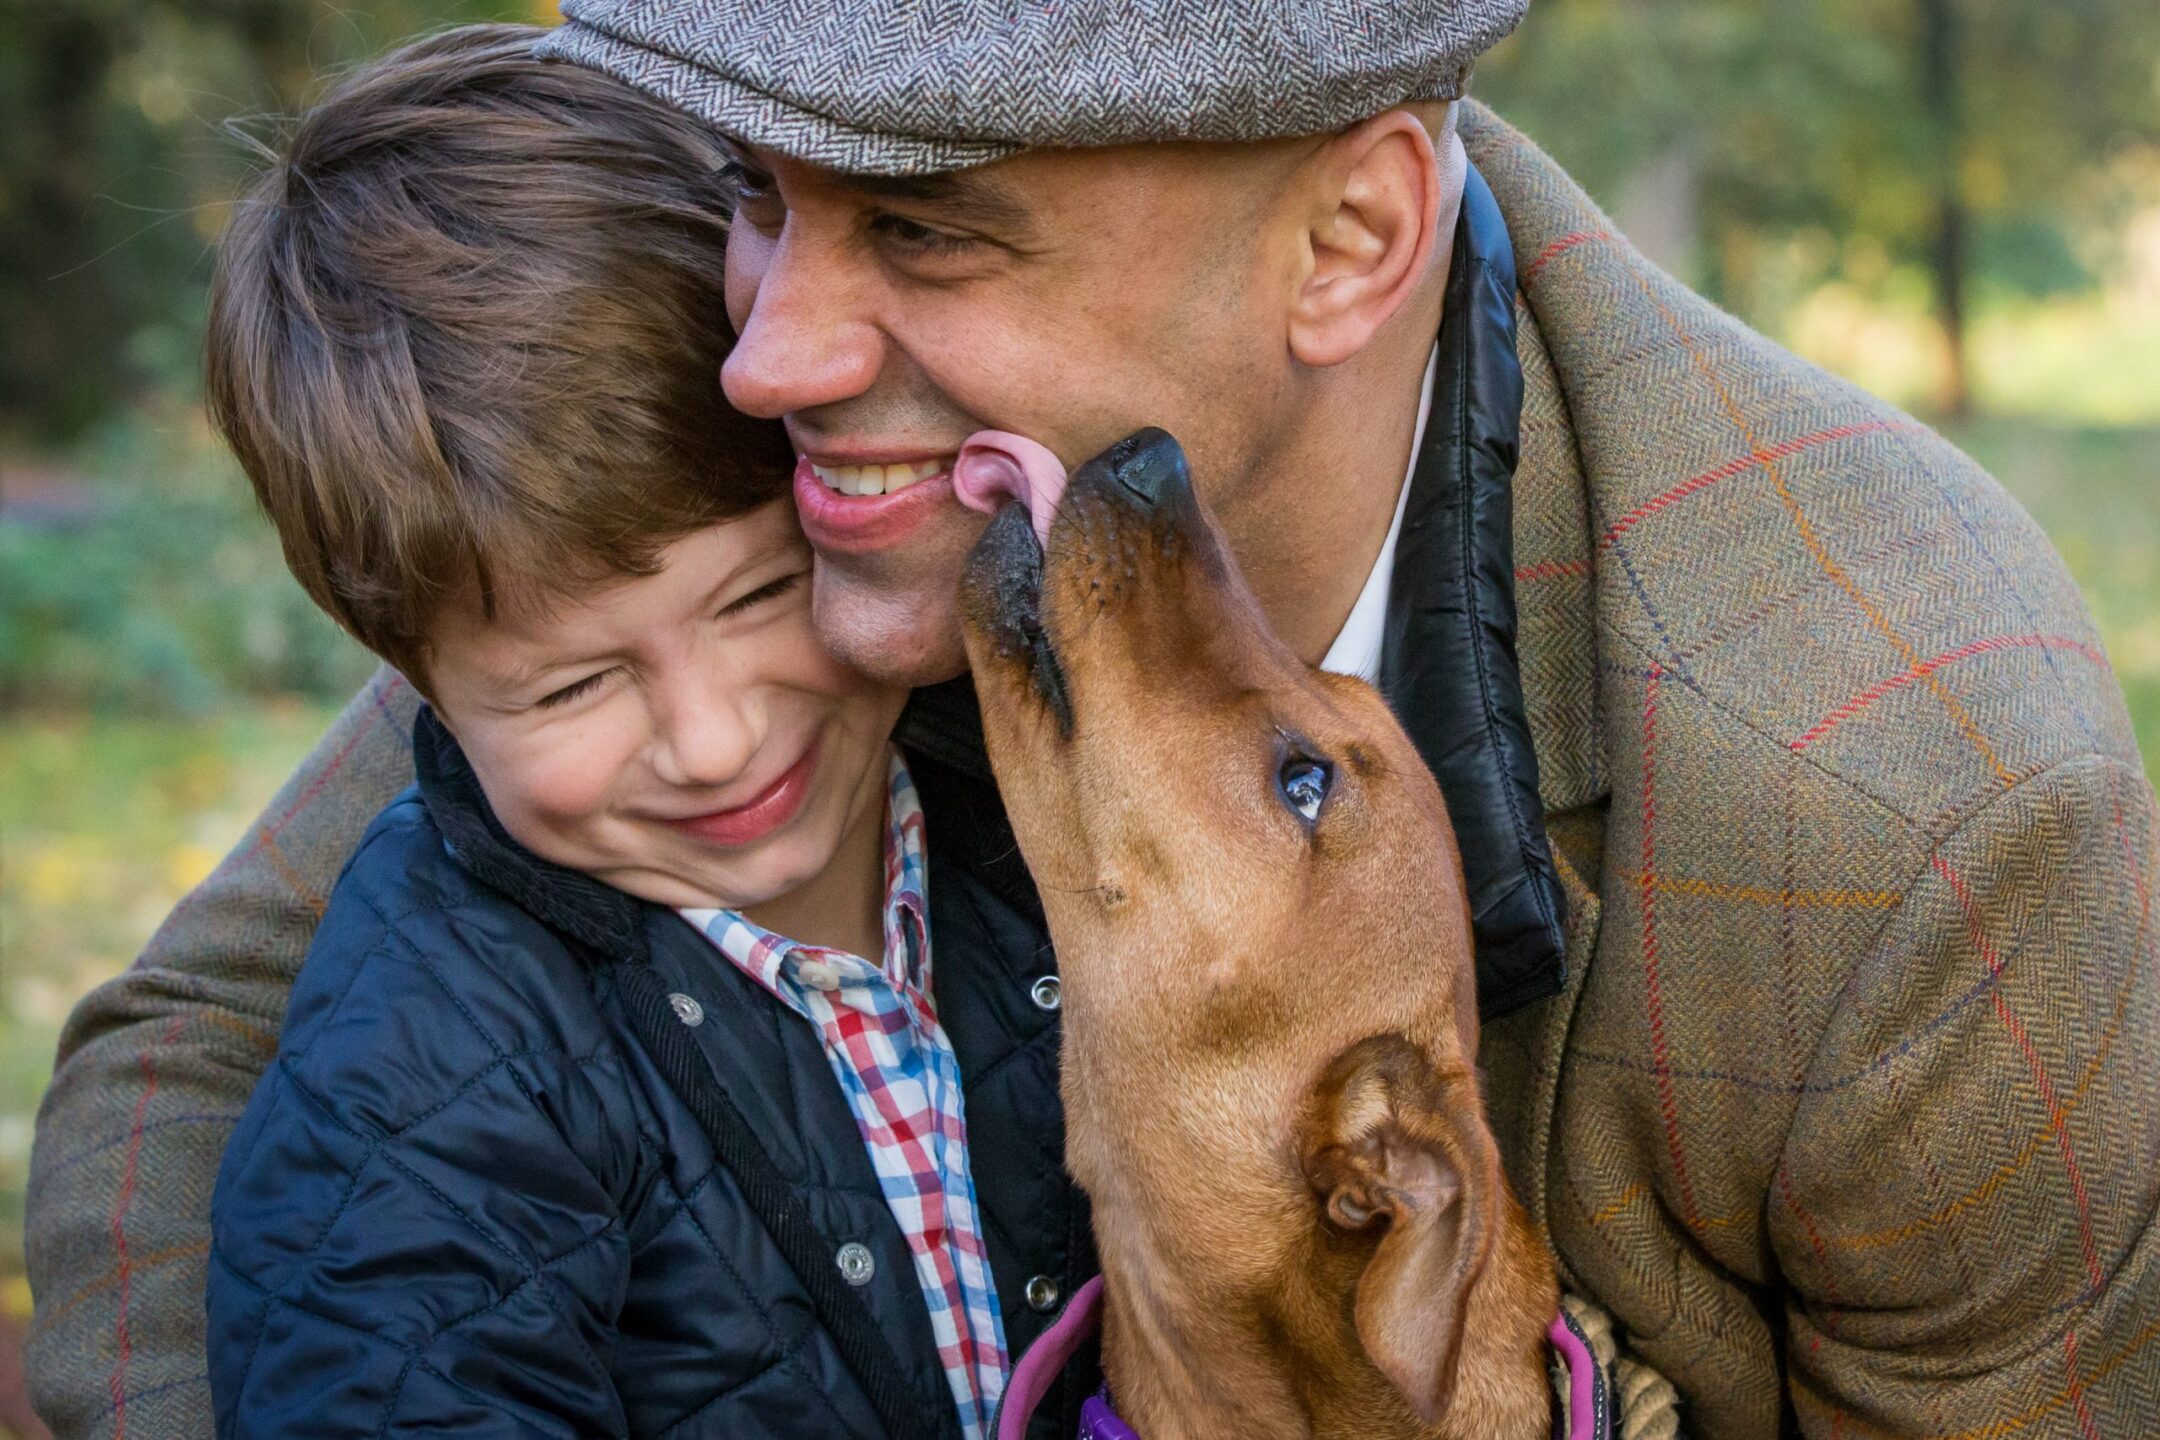 Outdoor family photograph of a boy and his dad laughing at the dog licking them